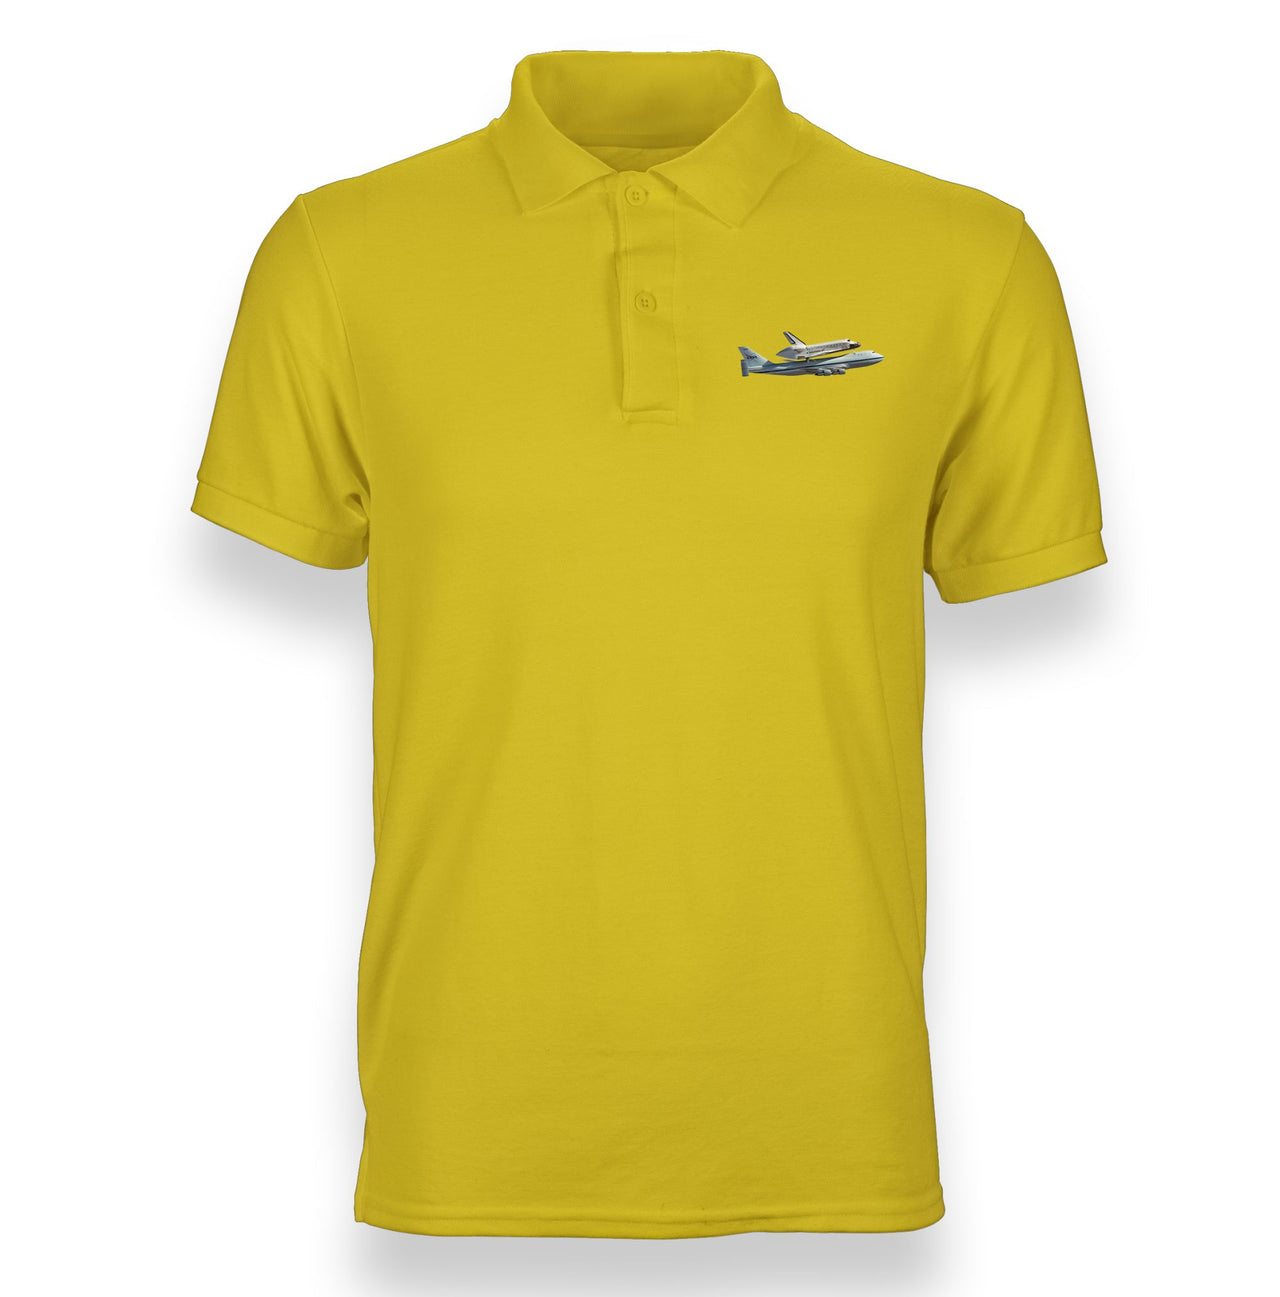 Space shuttle on 747 Designed "WOMEN" Polo T-Shirts